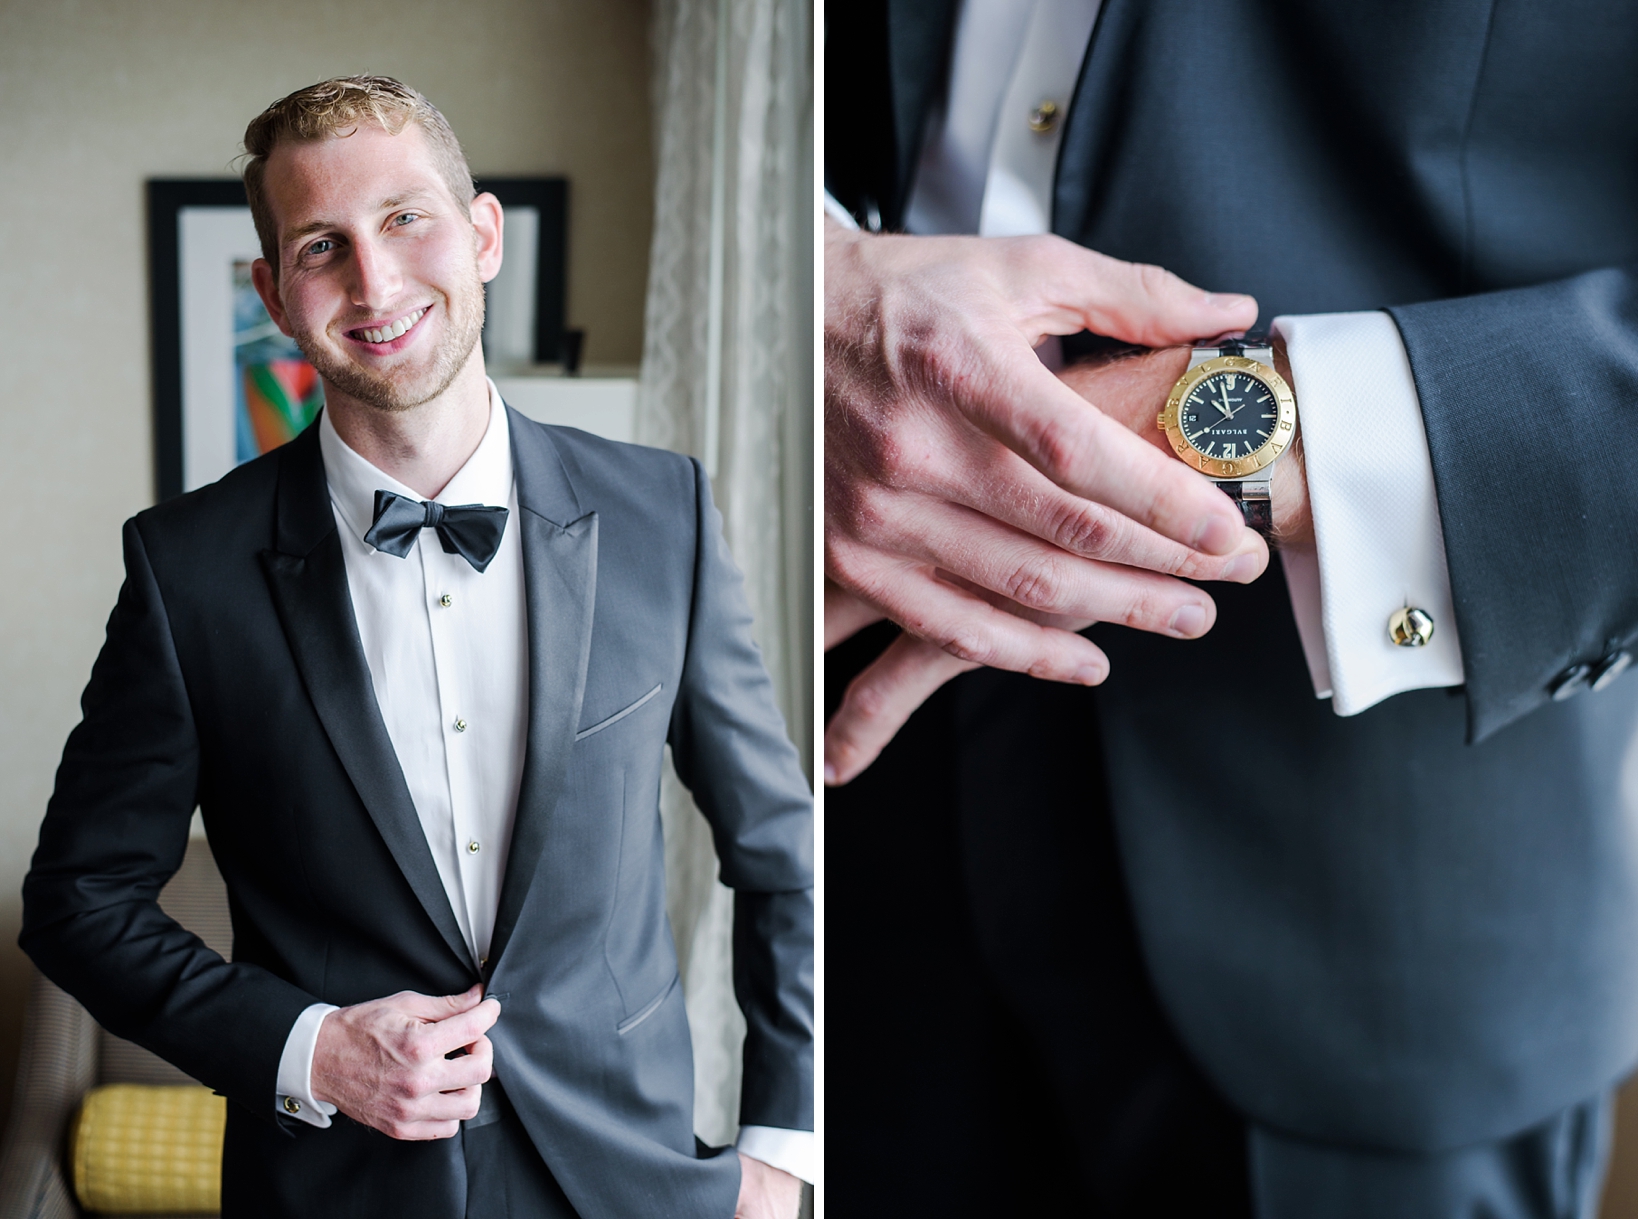 The groom looking sharp in a black suit and bowtie and sporting custom cufflinks and a Bulgari watch